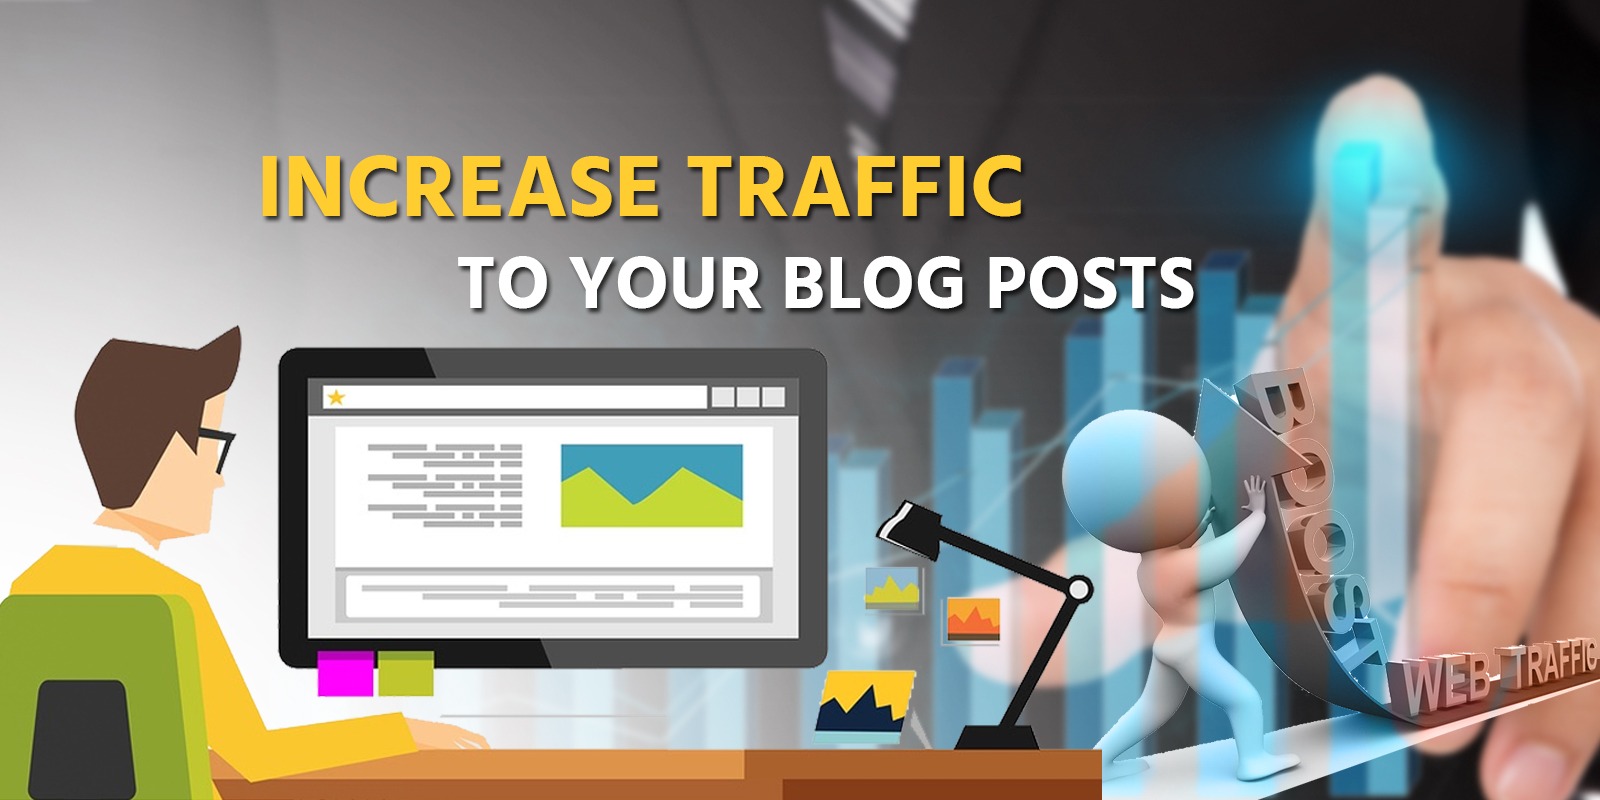 how to increase traffic to your blog posts quickly and easily?